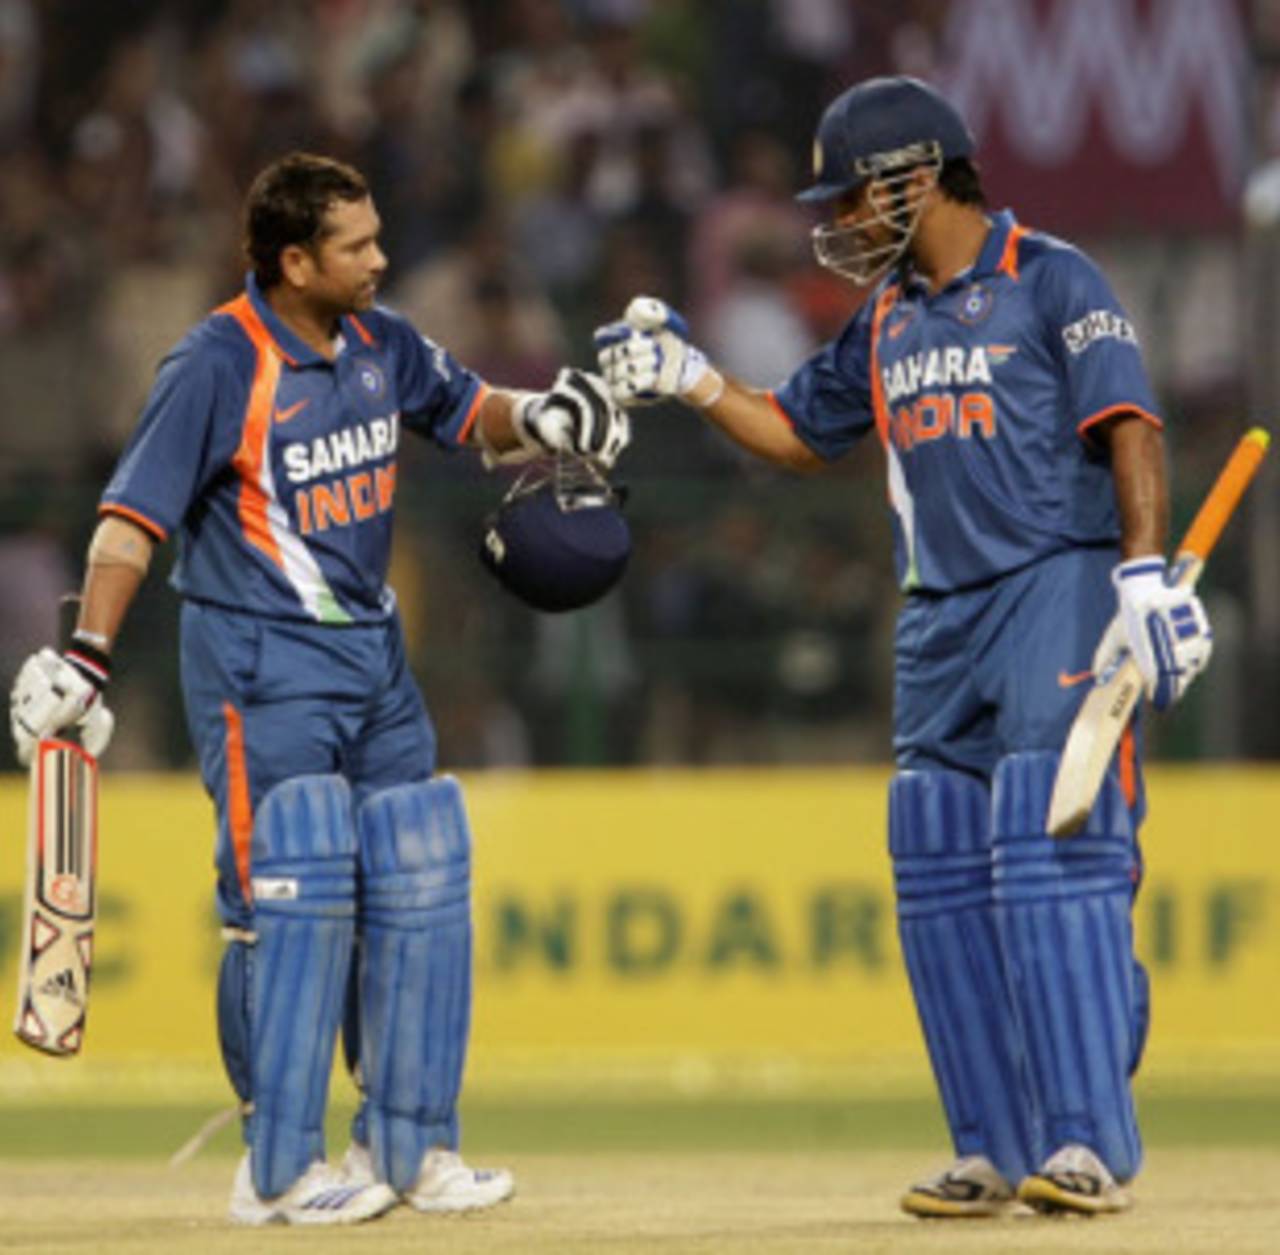 Sachin Tendulkar is congratulated by MS Dhoni after rewriting the record books, 2nd ODI, Gwalior, February 24, 2010